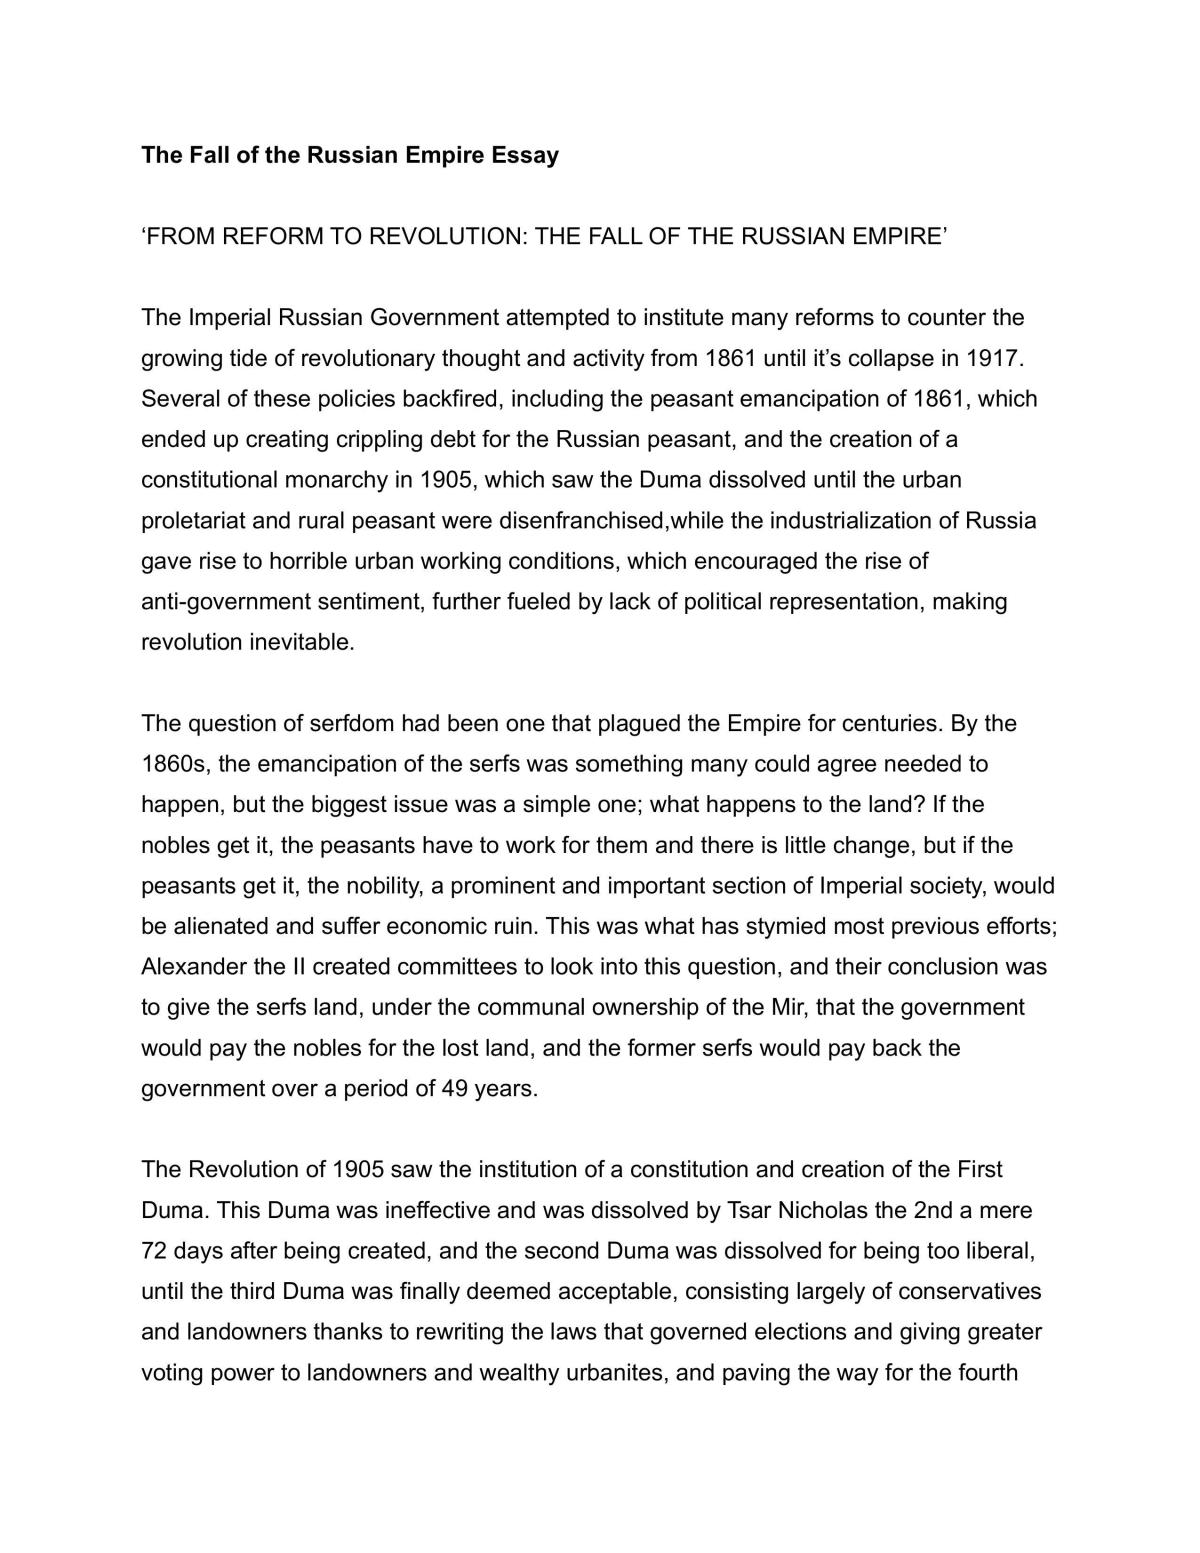 The Fall of the Russian Empire - Page 1